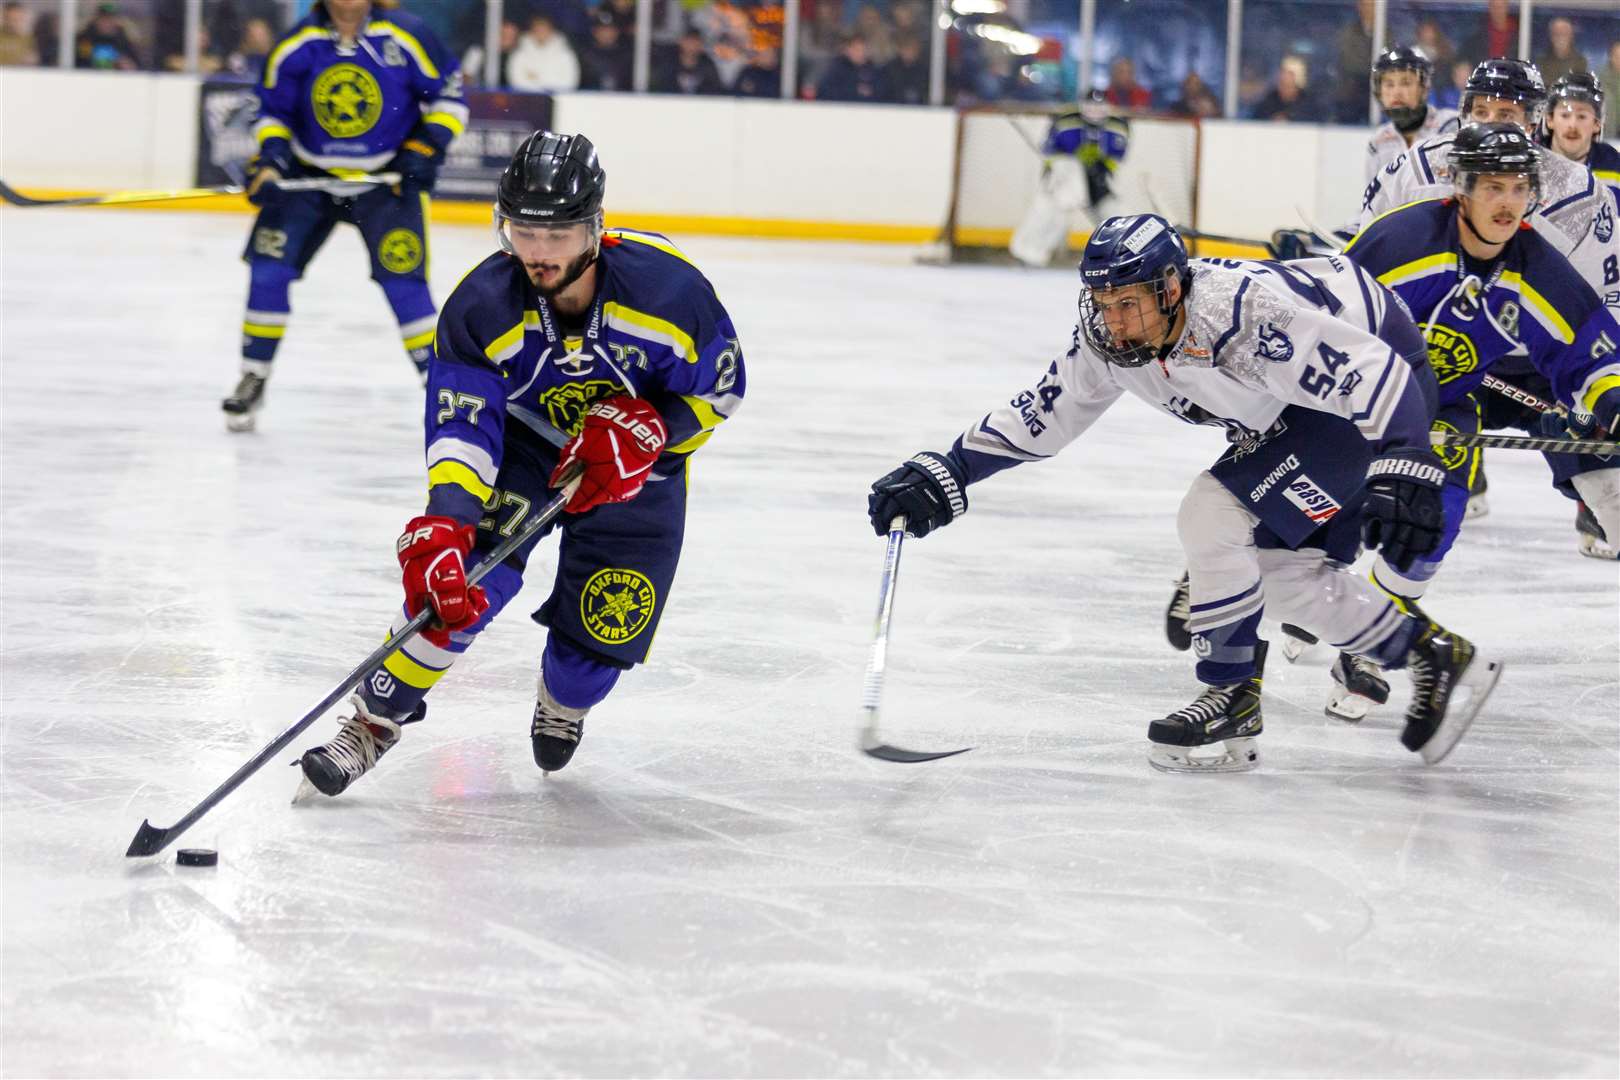 Taylor Chard defends the Oxford attack for Invicta Dynamos Picture: David Trevallion